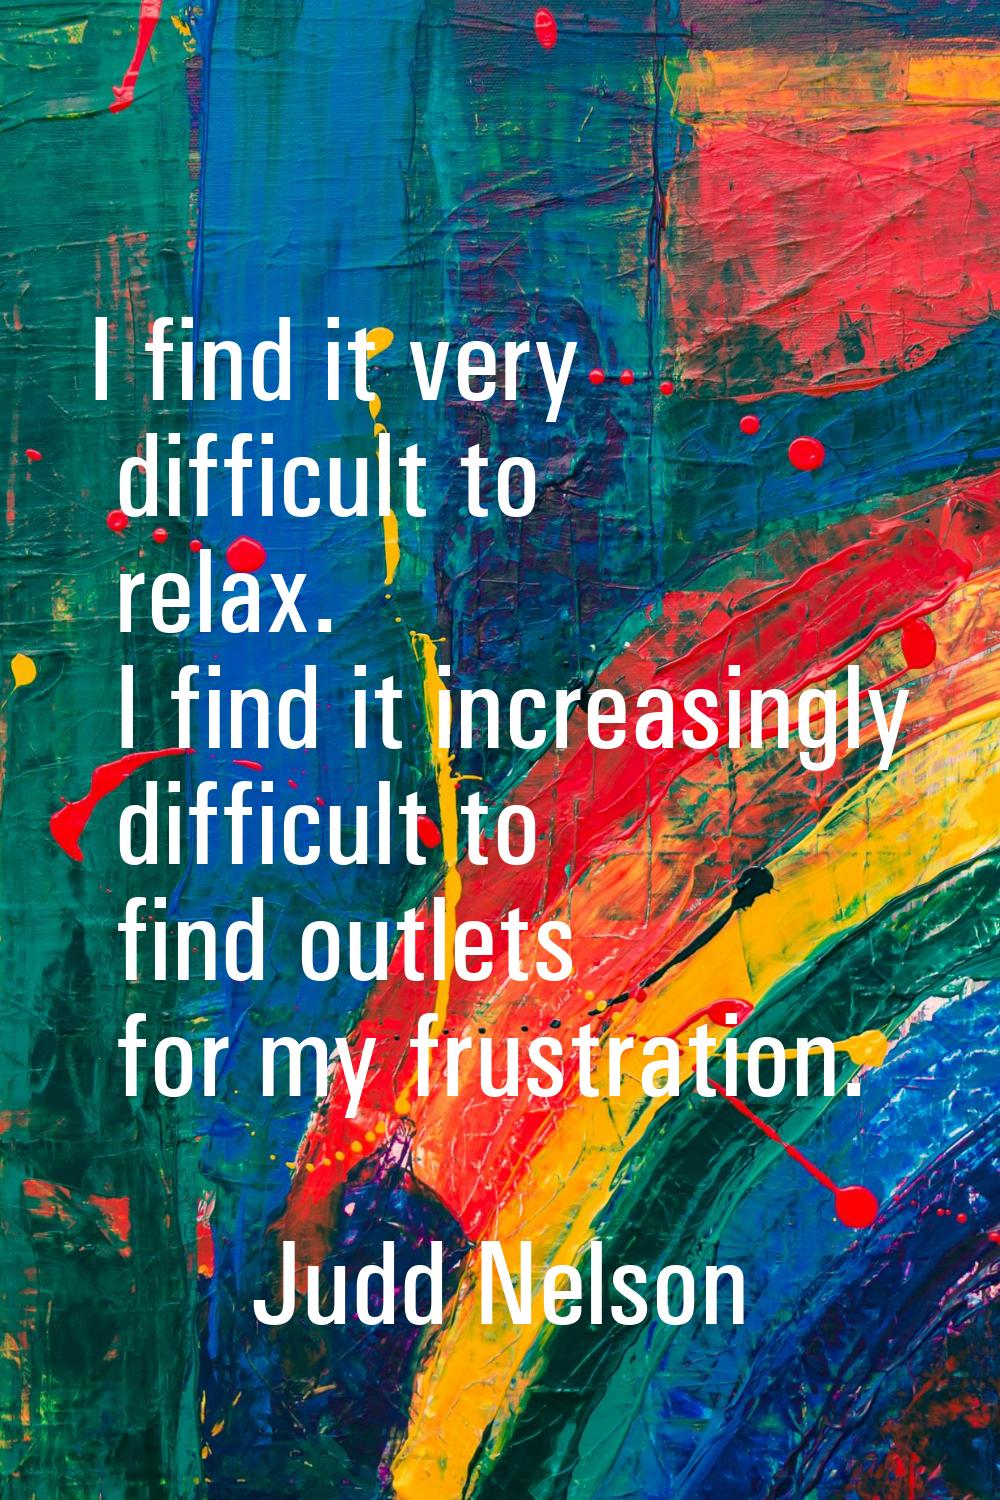 I find it very difficult to relax. I find it increasingly difficult to find outlets for my frustrat